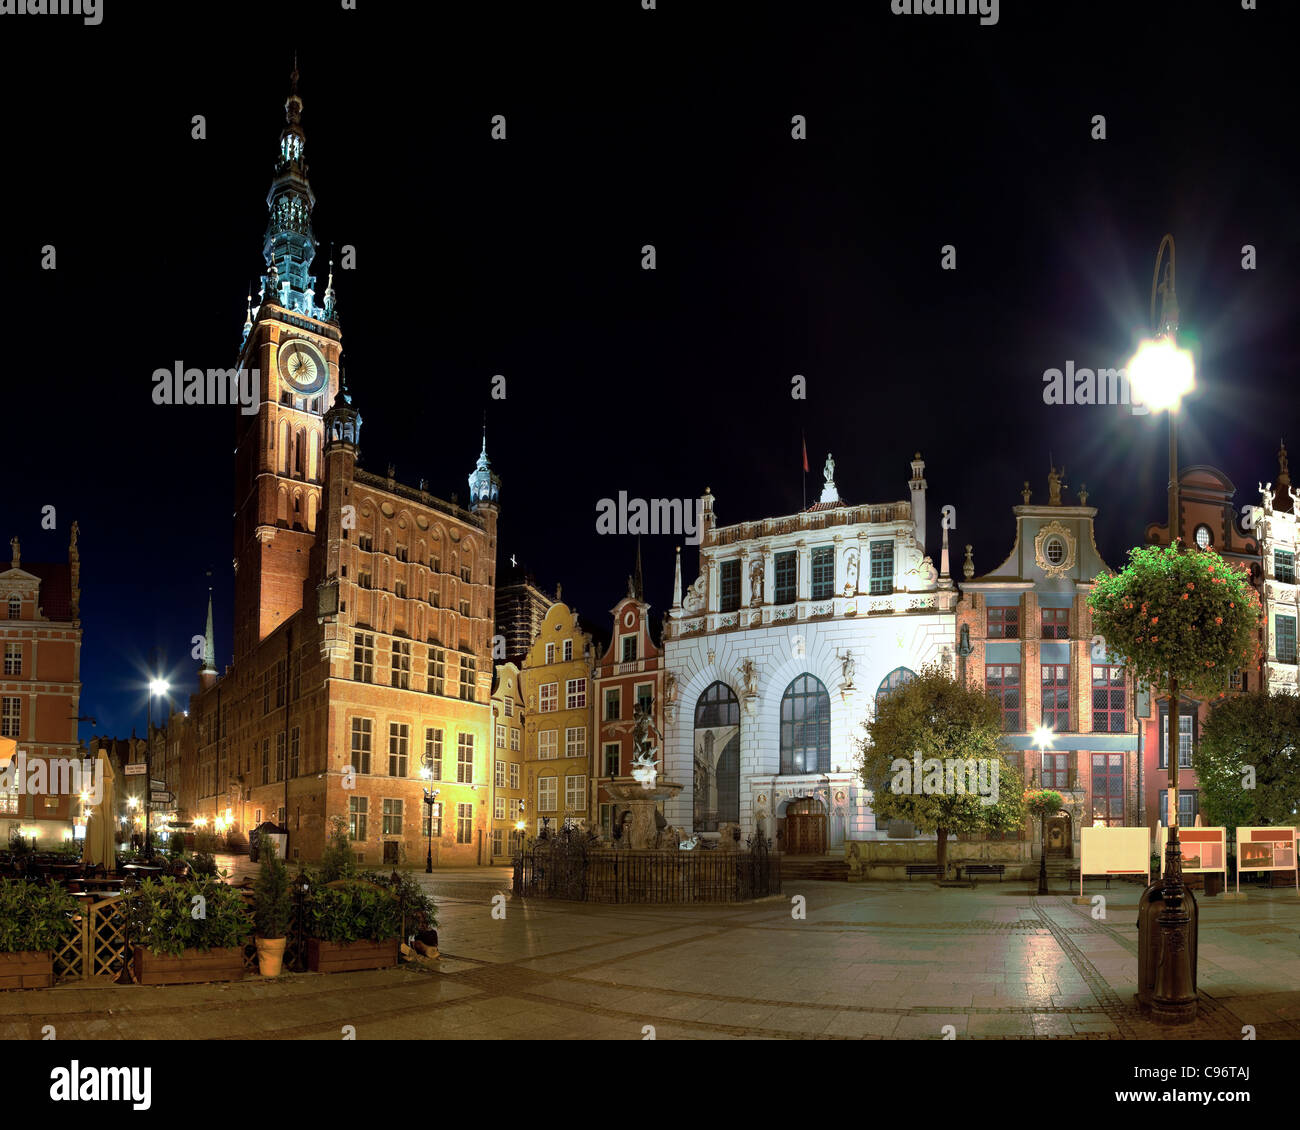 The Town Hall and Artus Court in Gdansk, Poland. Stock Photo